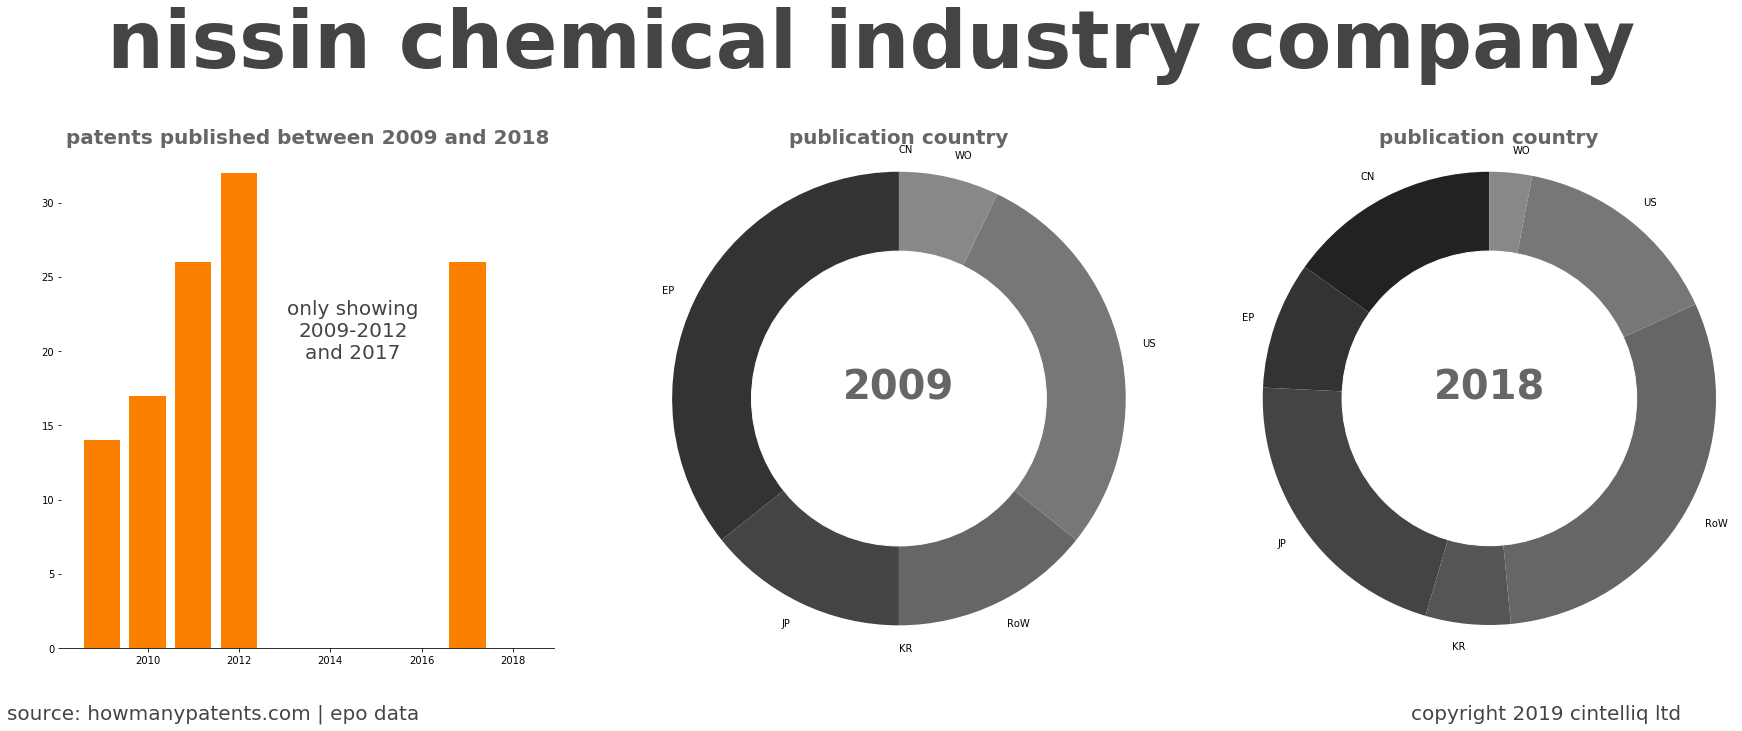 summary of patents for Nissin Chemical Industry Company